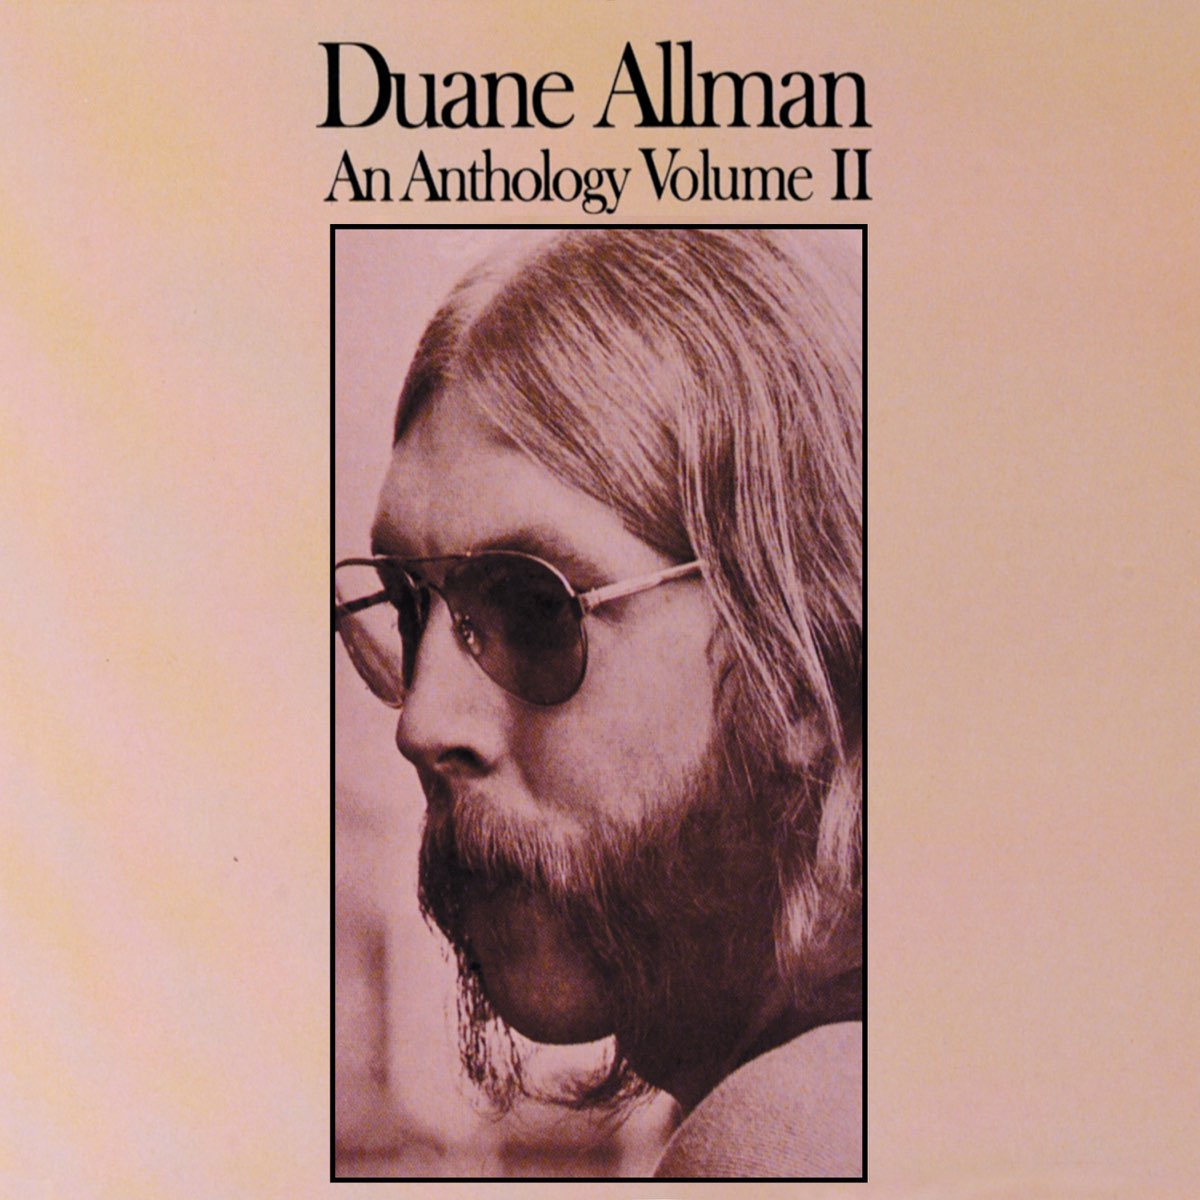 An Anthology Volume Ii By Duane Allman On Apple Music